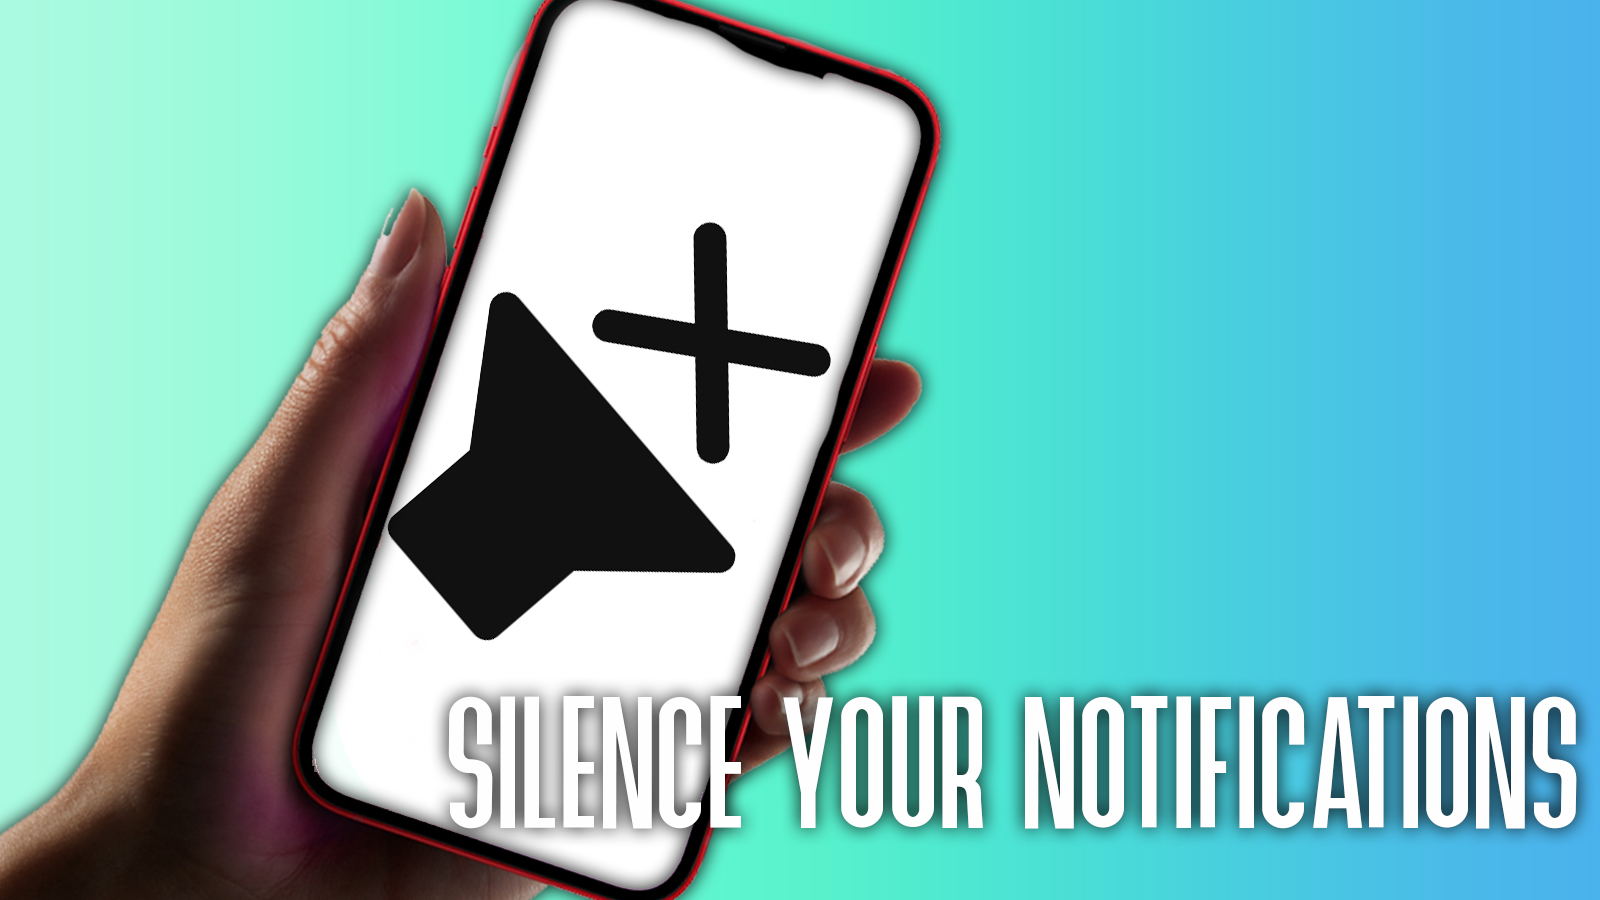 The way to silence notifications on iPhone – Egaxo